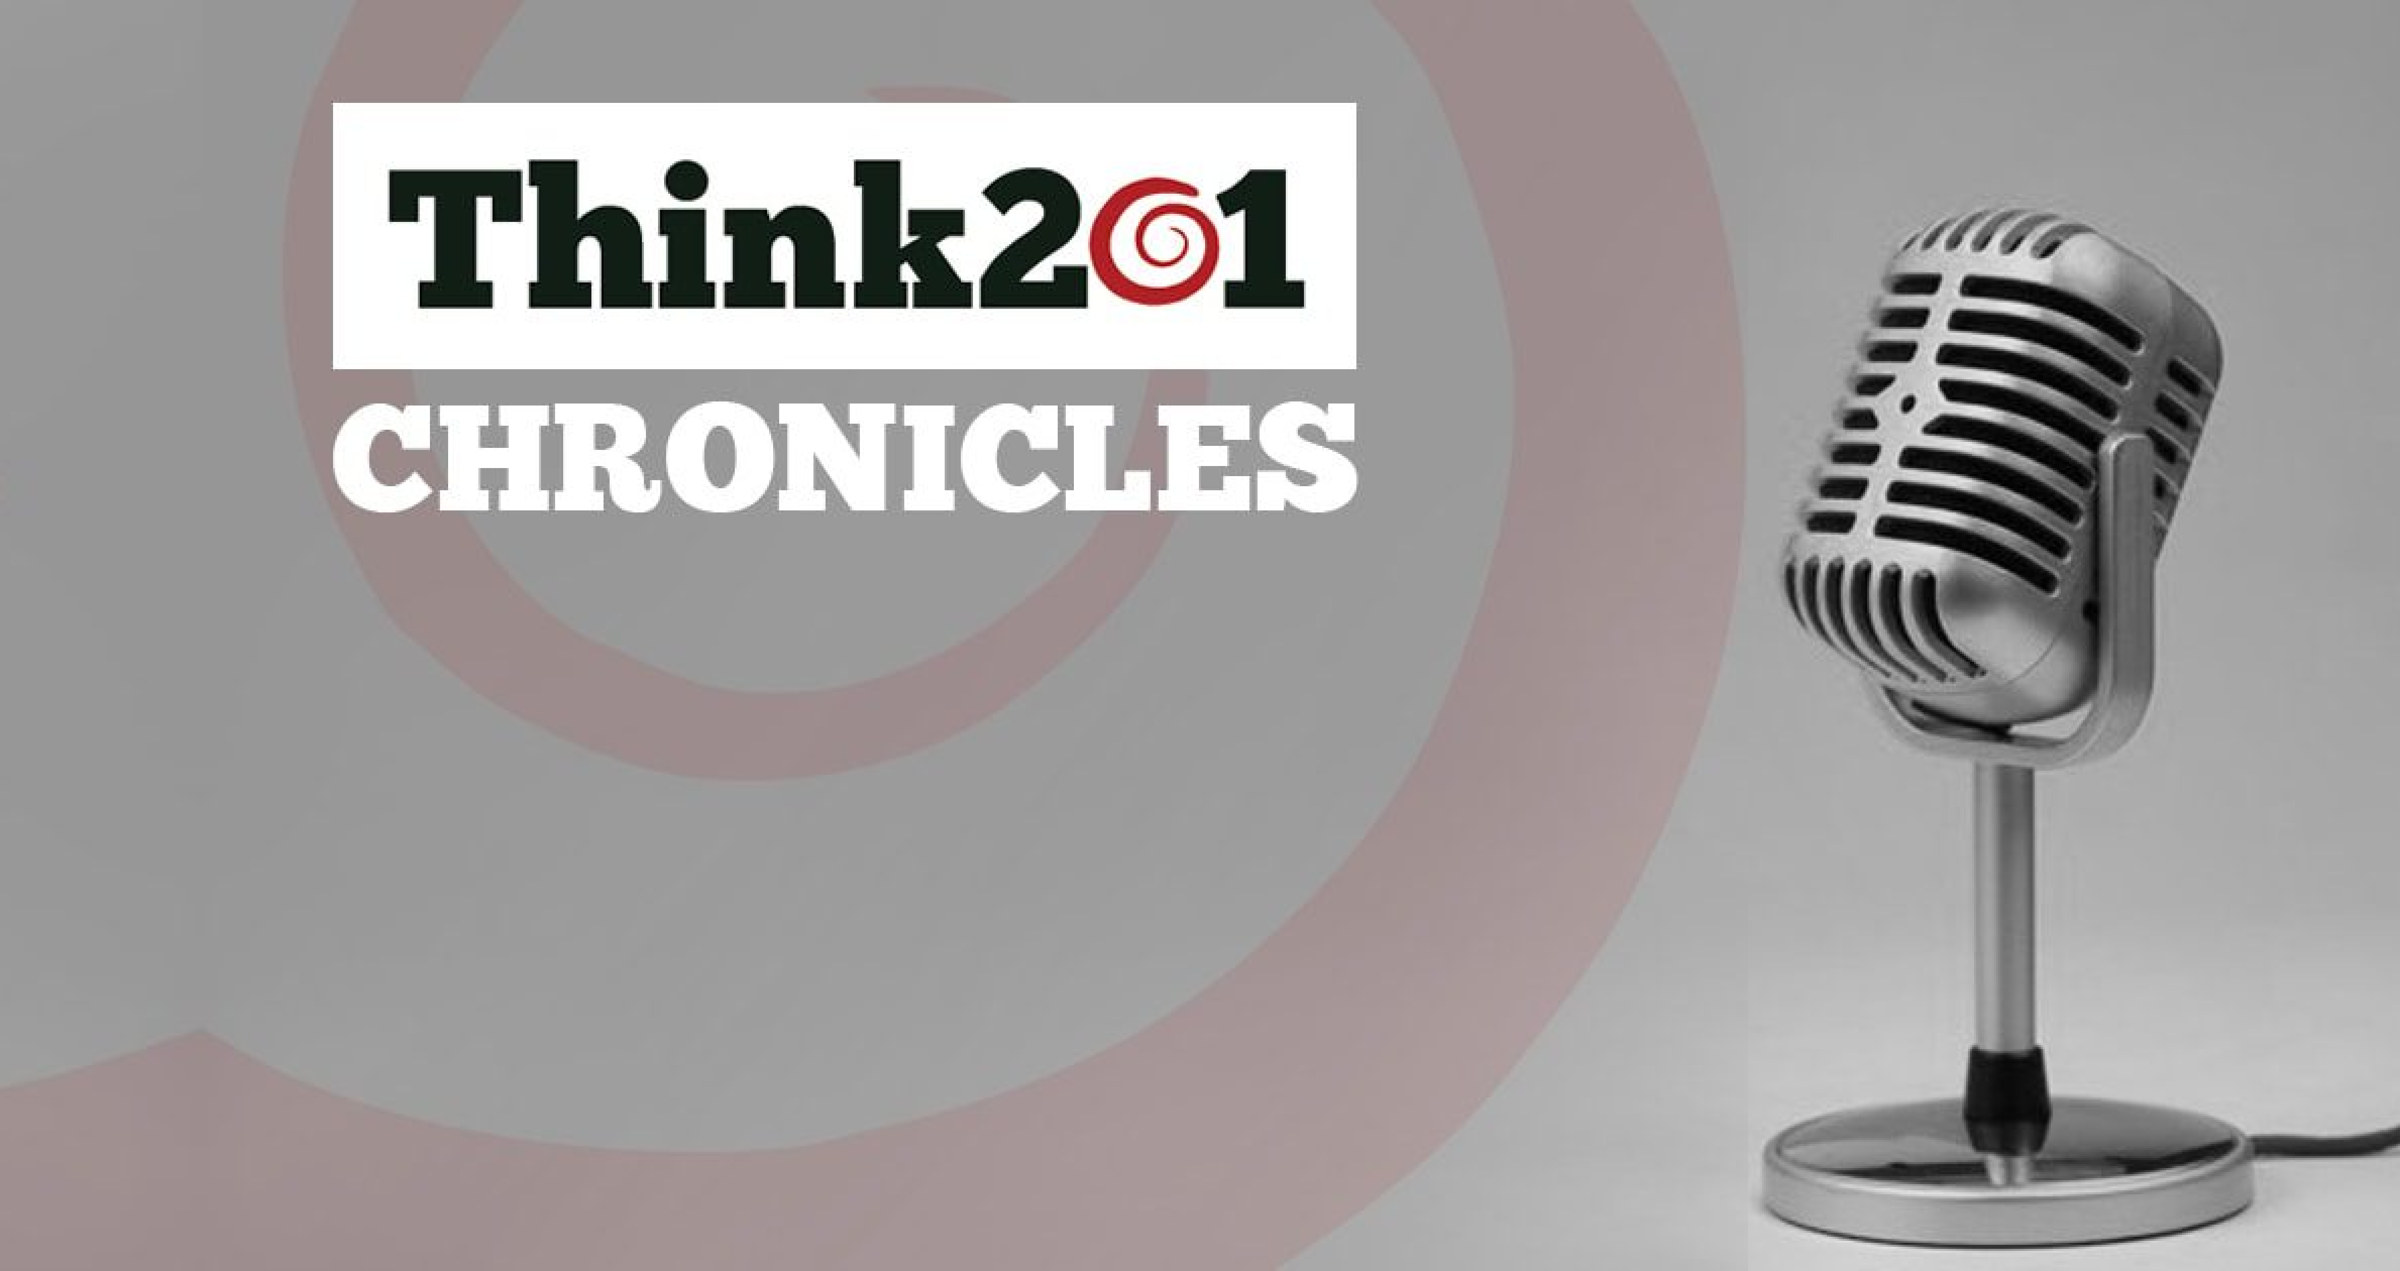 Think201 Chronicles Podcast: The Journey of Think201 (A Tech Startup), Ep. 01